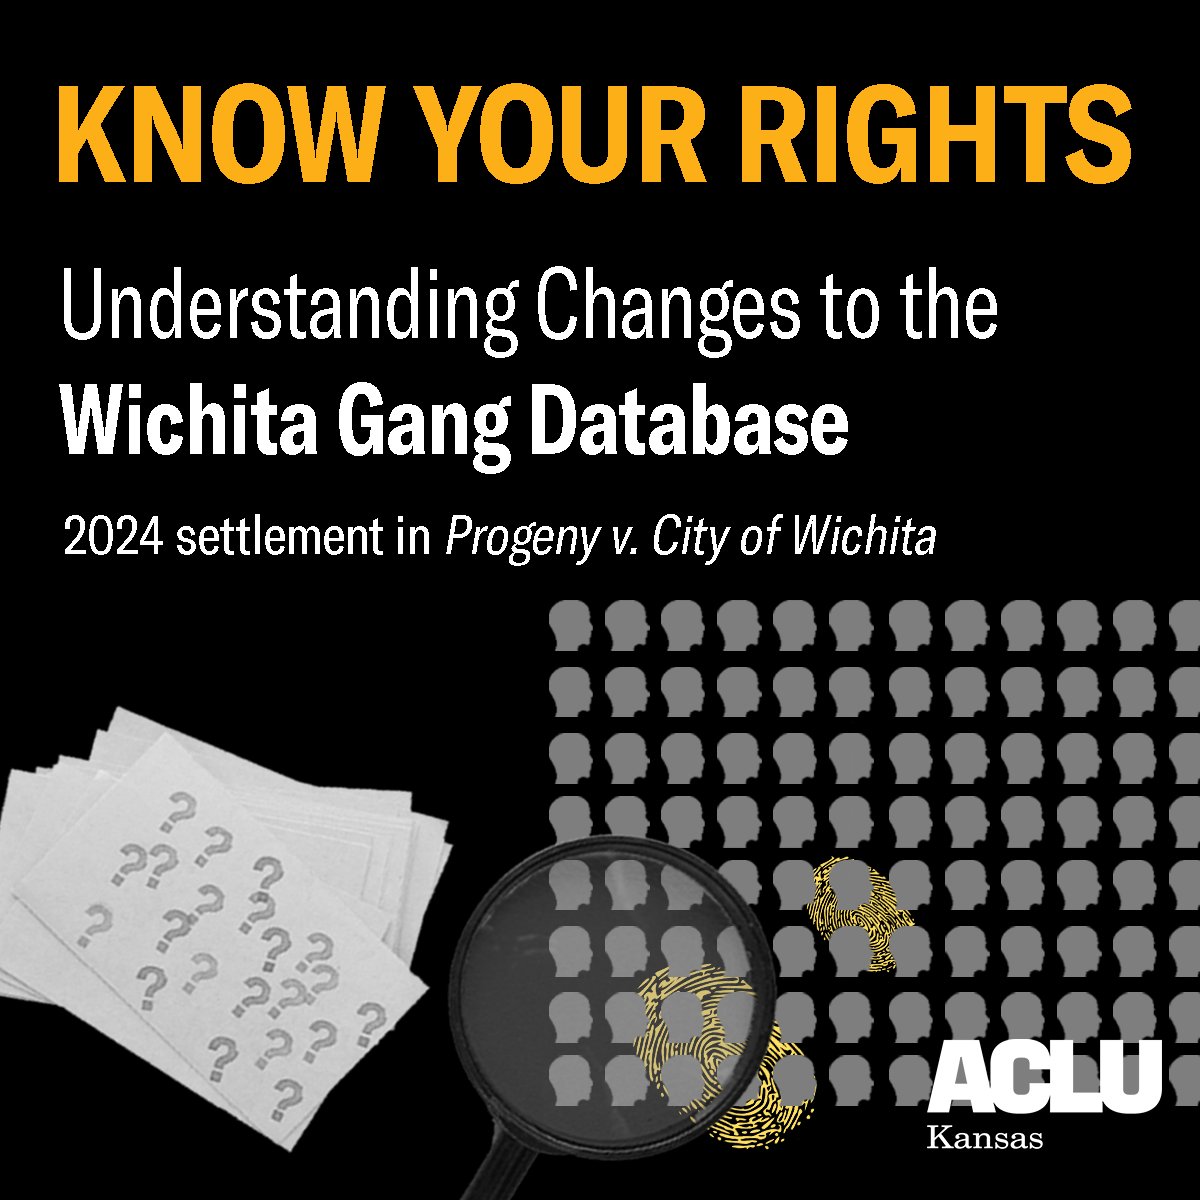 Learn more details about our settlement in Progeny v. City of Wichita and how it affects you at aclukansas.org/wichitaganglist.